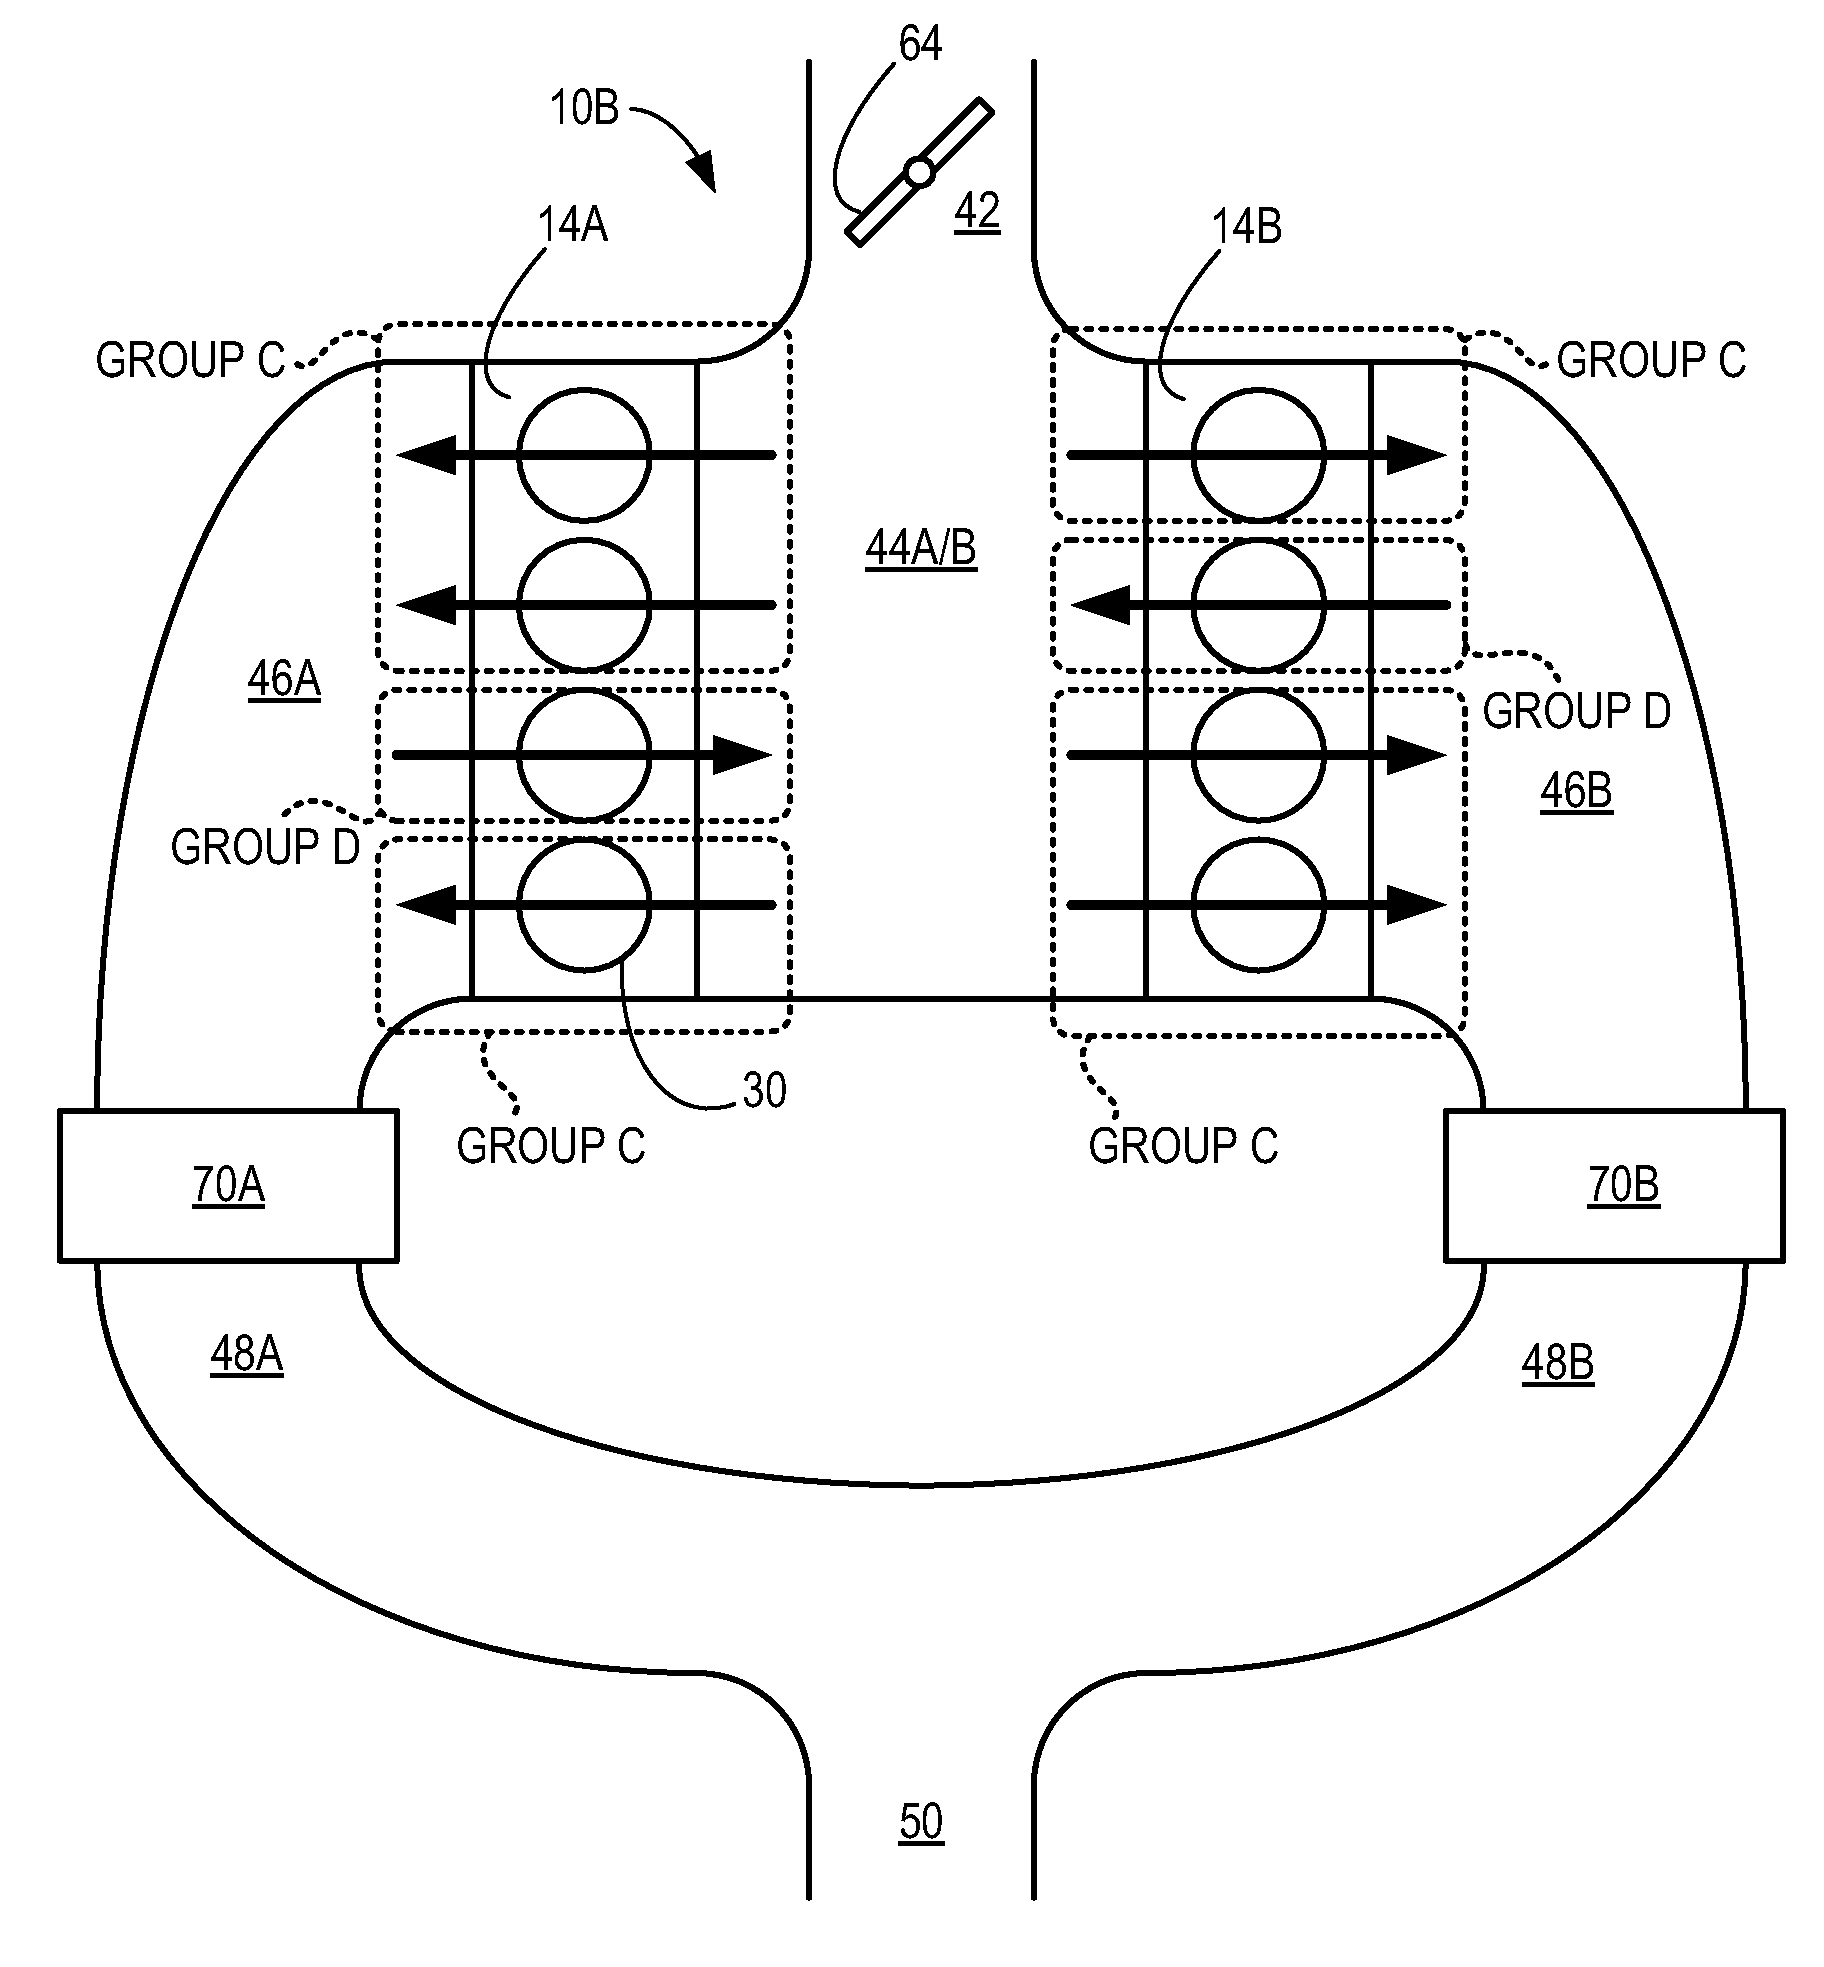 Cylinder charge temperature control for an internal combustion engine